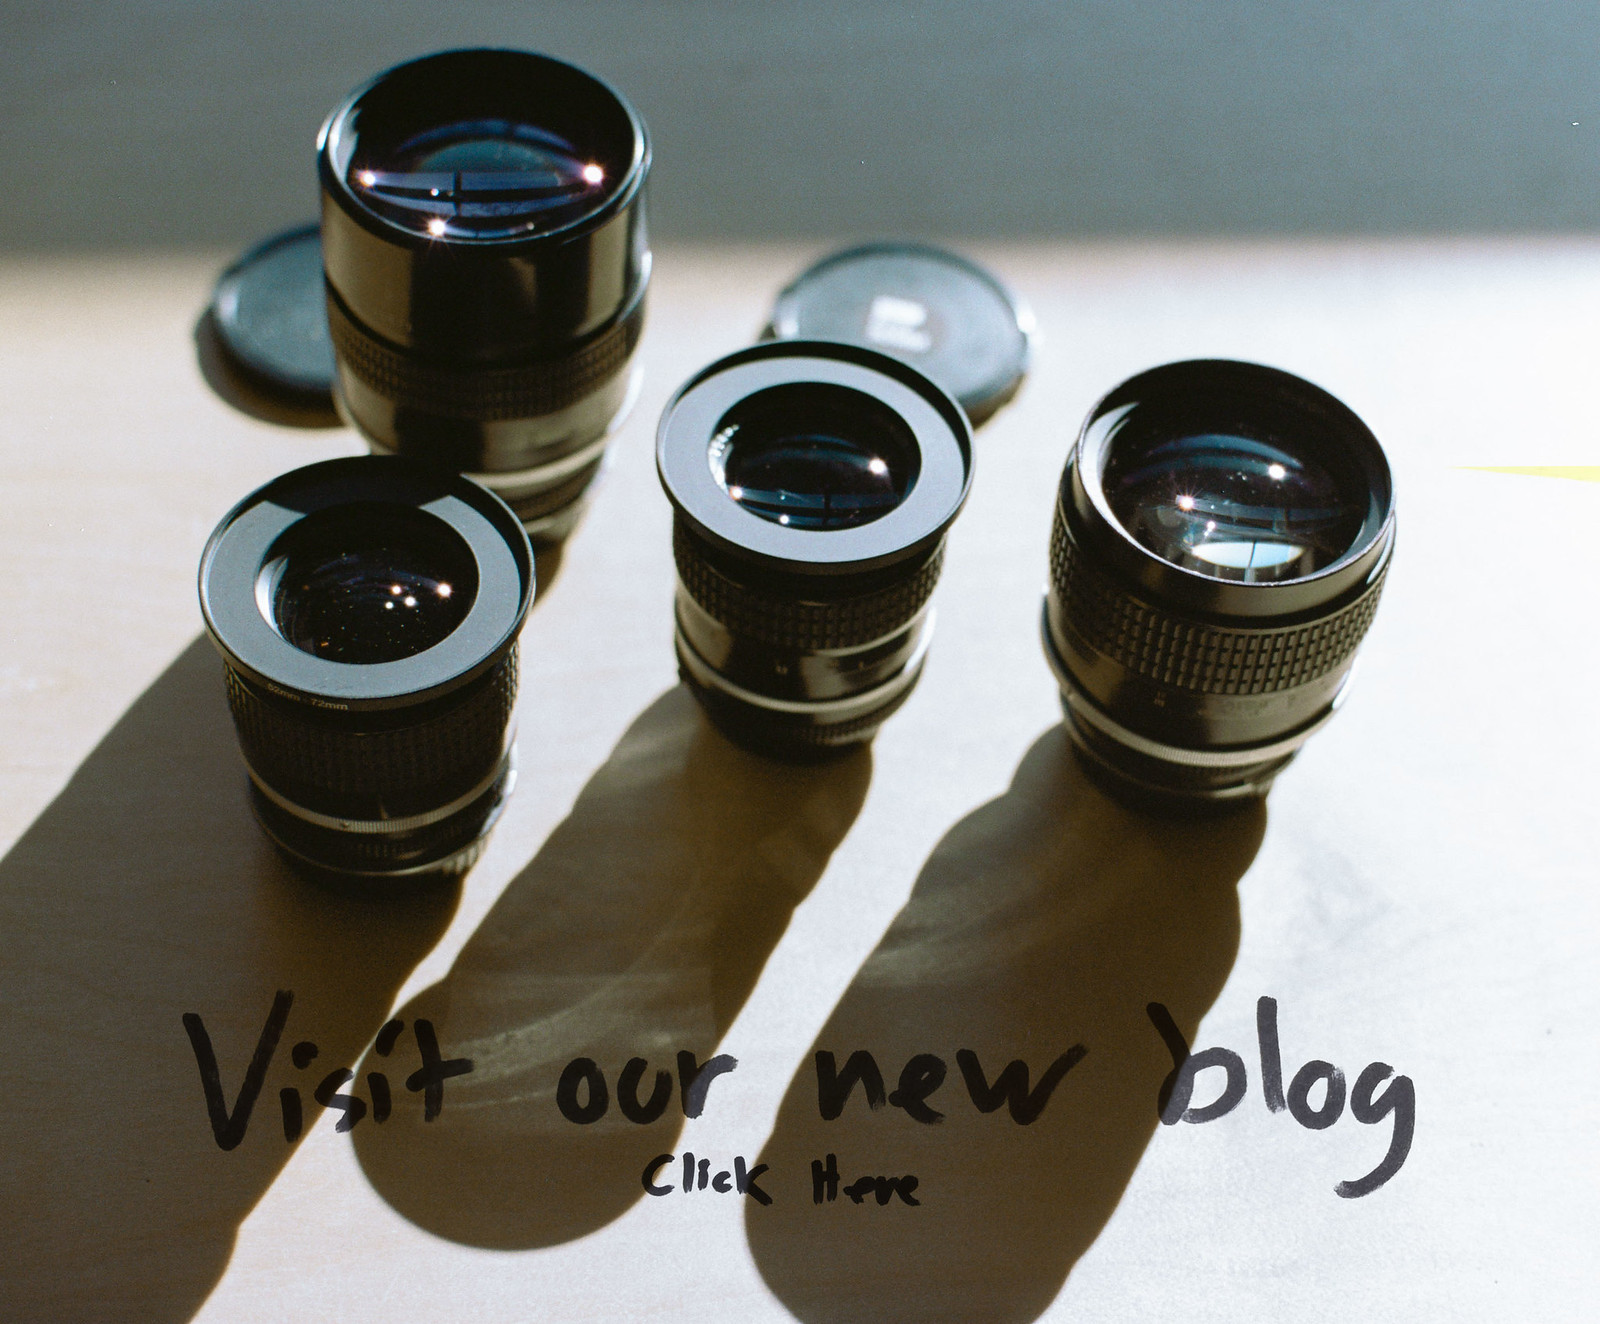 Visit our new blog